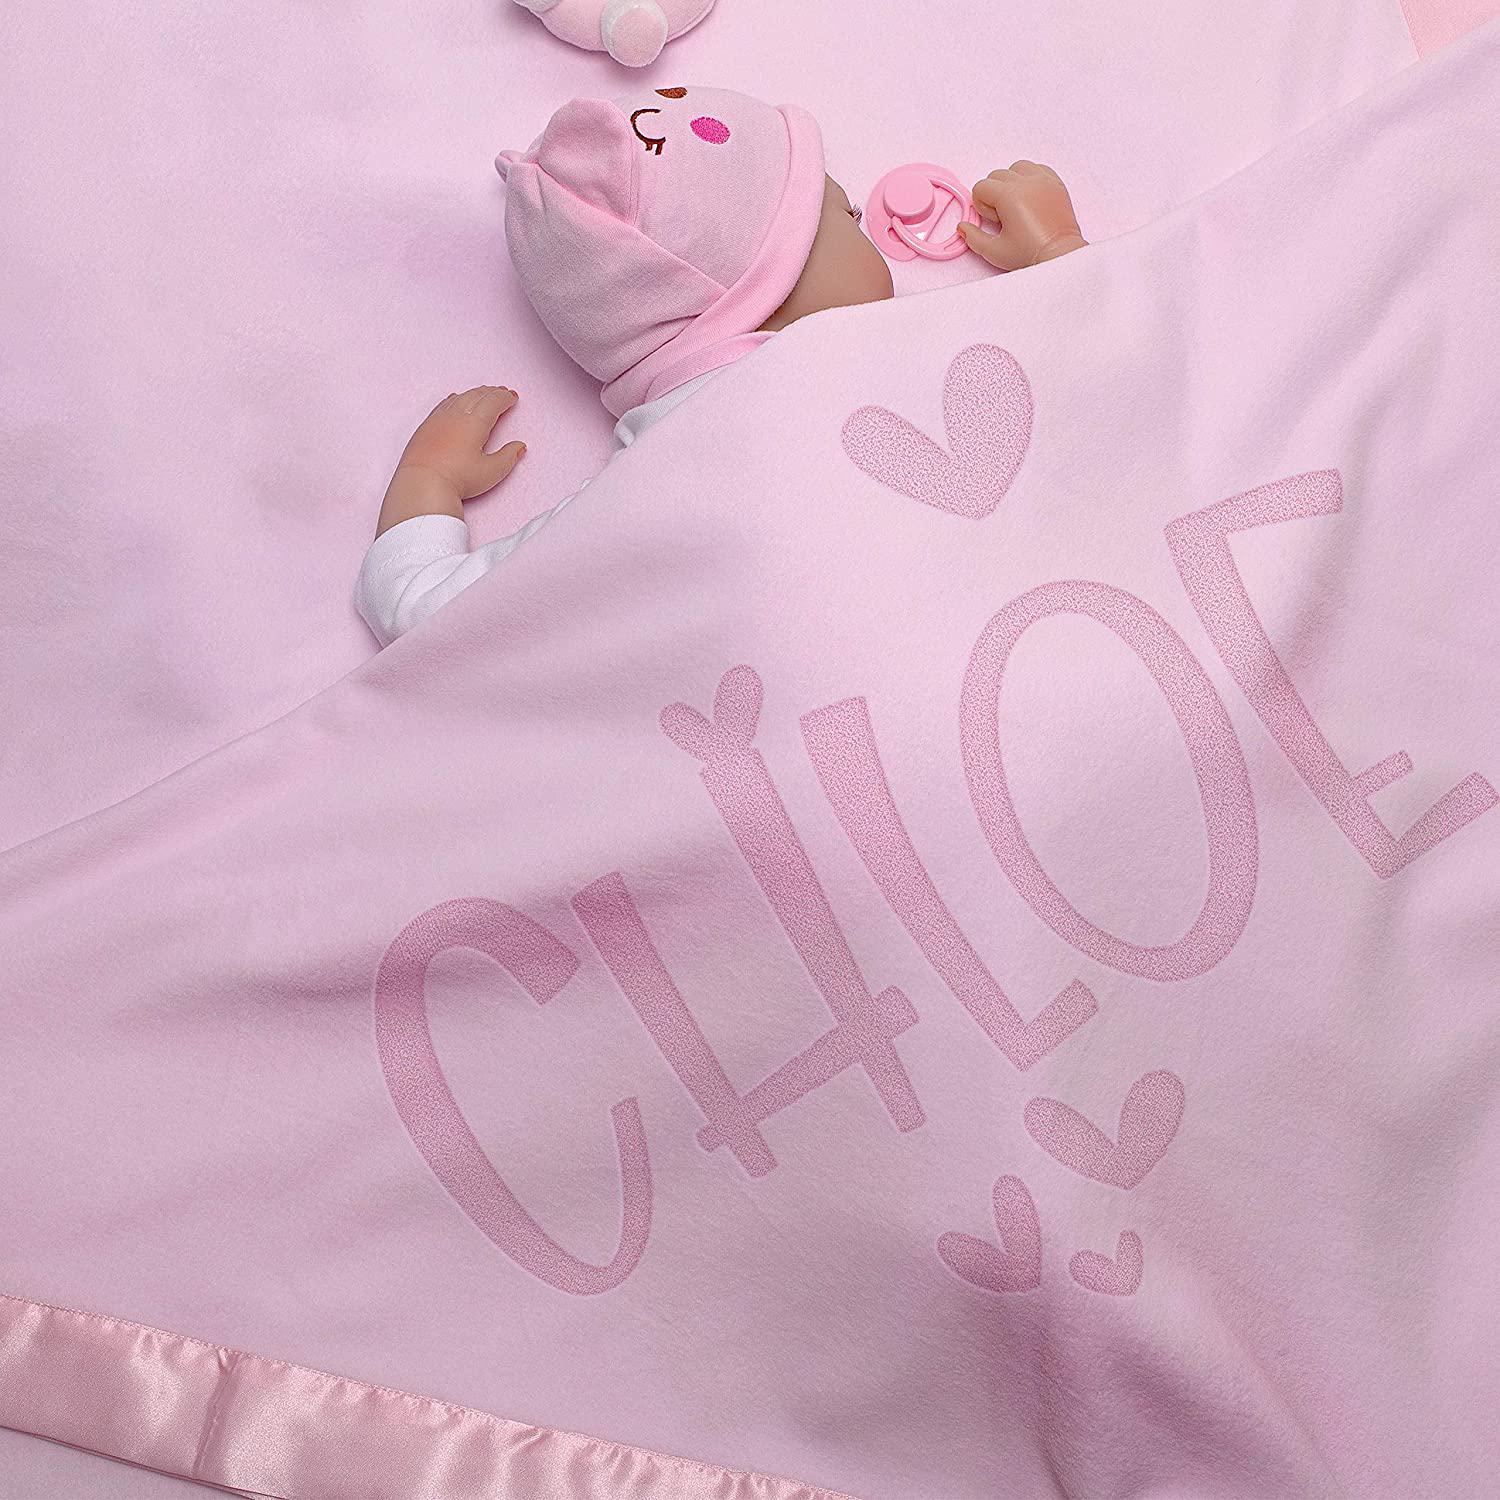 Awesome Personalized Fleece Blankets